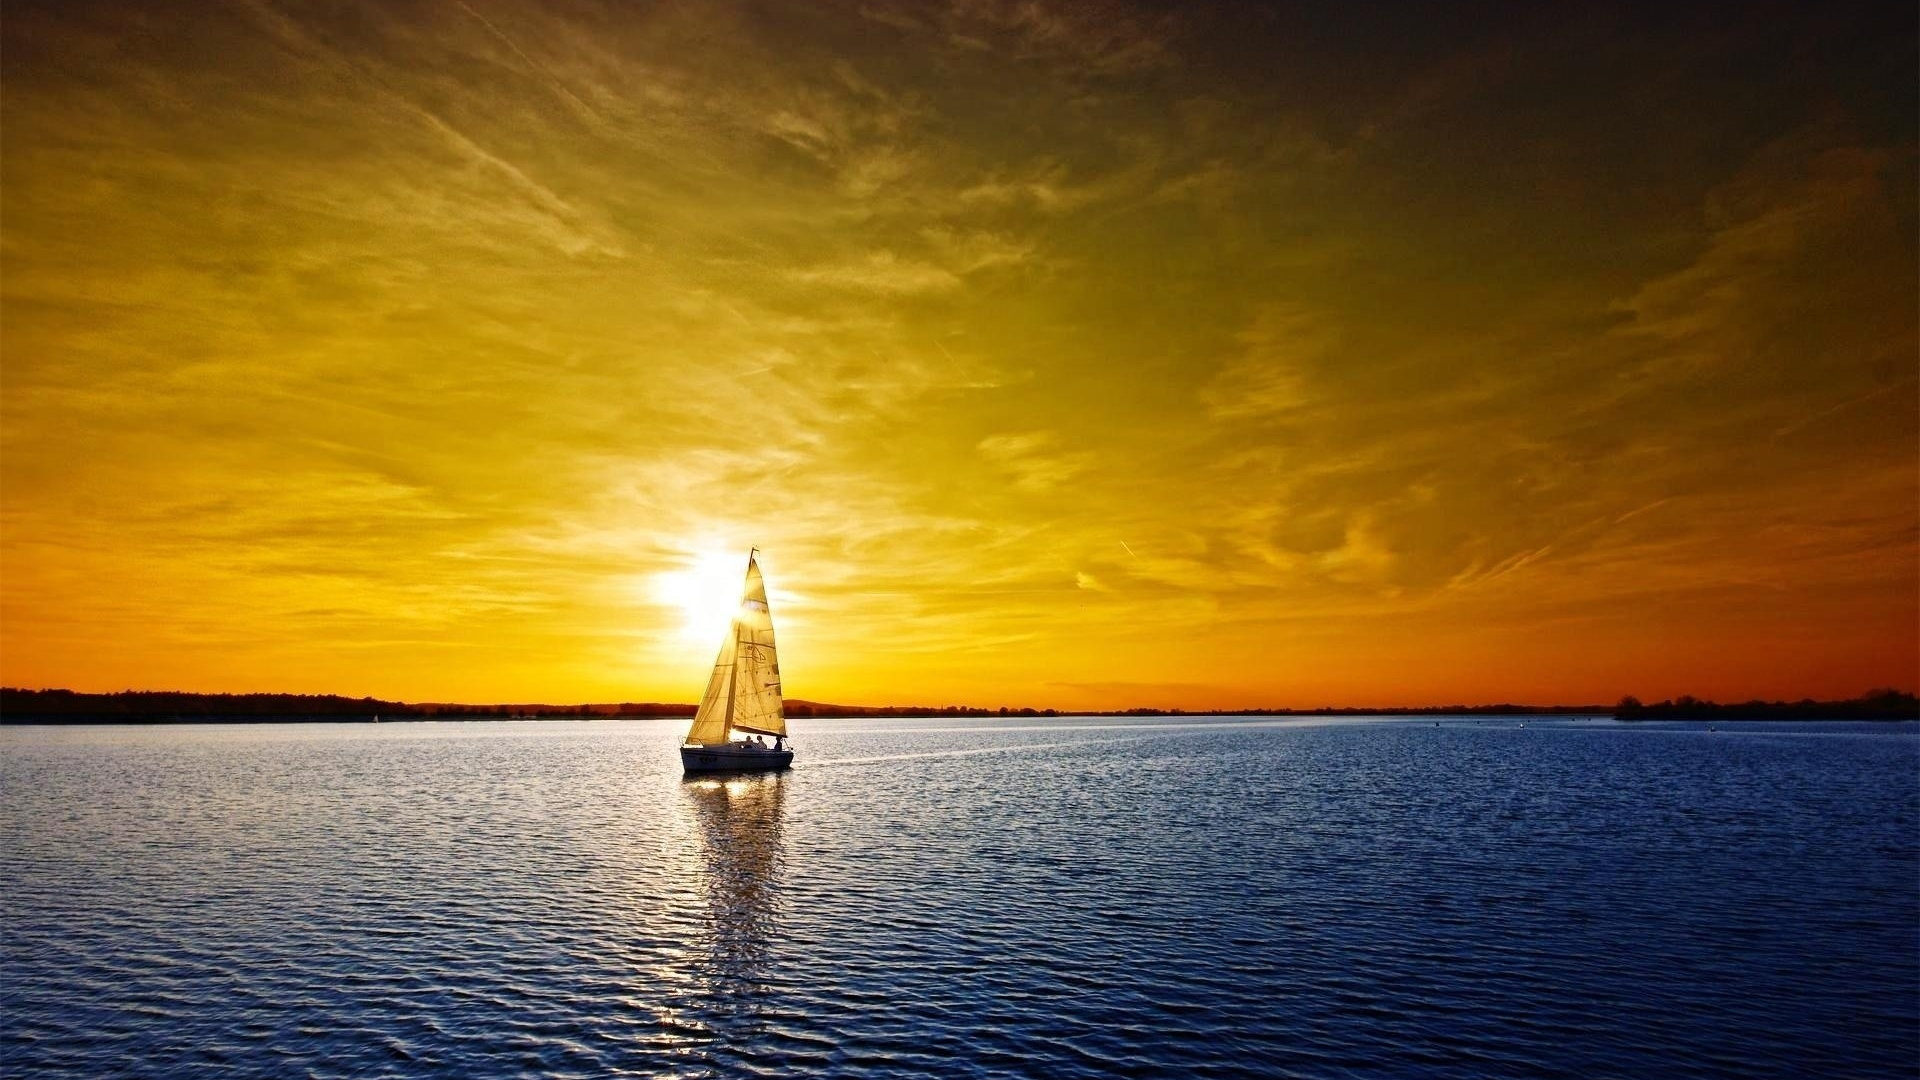 Sailboat on Sea During Sunset. Wallpaper in 1920x1080 Resolution